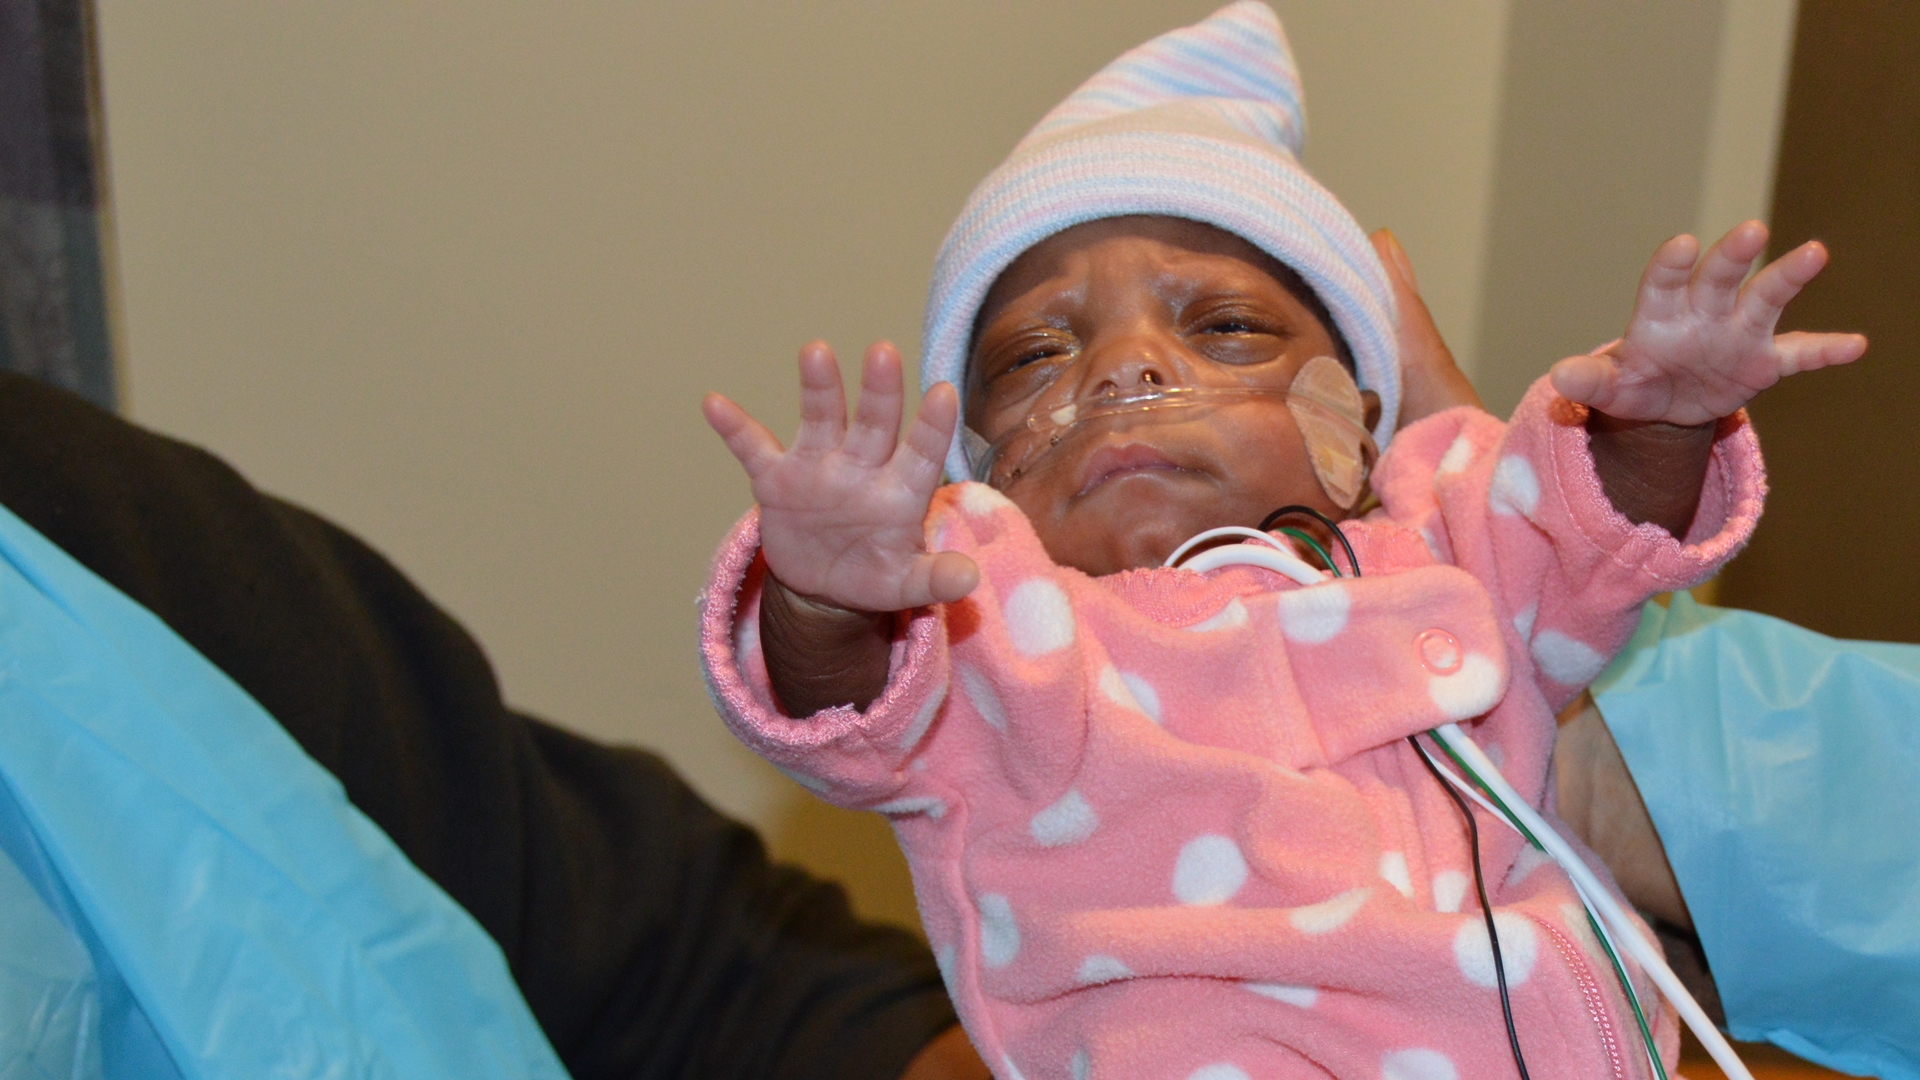 Baby E'Layah, born in September 2015,  spent nearly 20 weeks at Levine Children's Hospital before being cleared to go home in February 2016. She was one of the smallest surviving babies ever cared for at Levine Children's Hospital. 